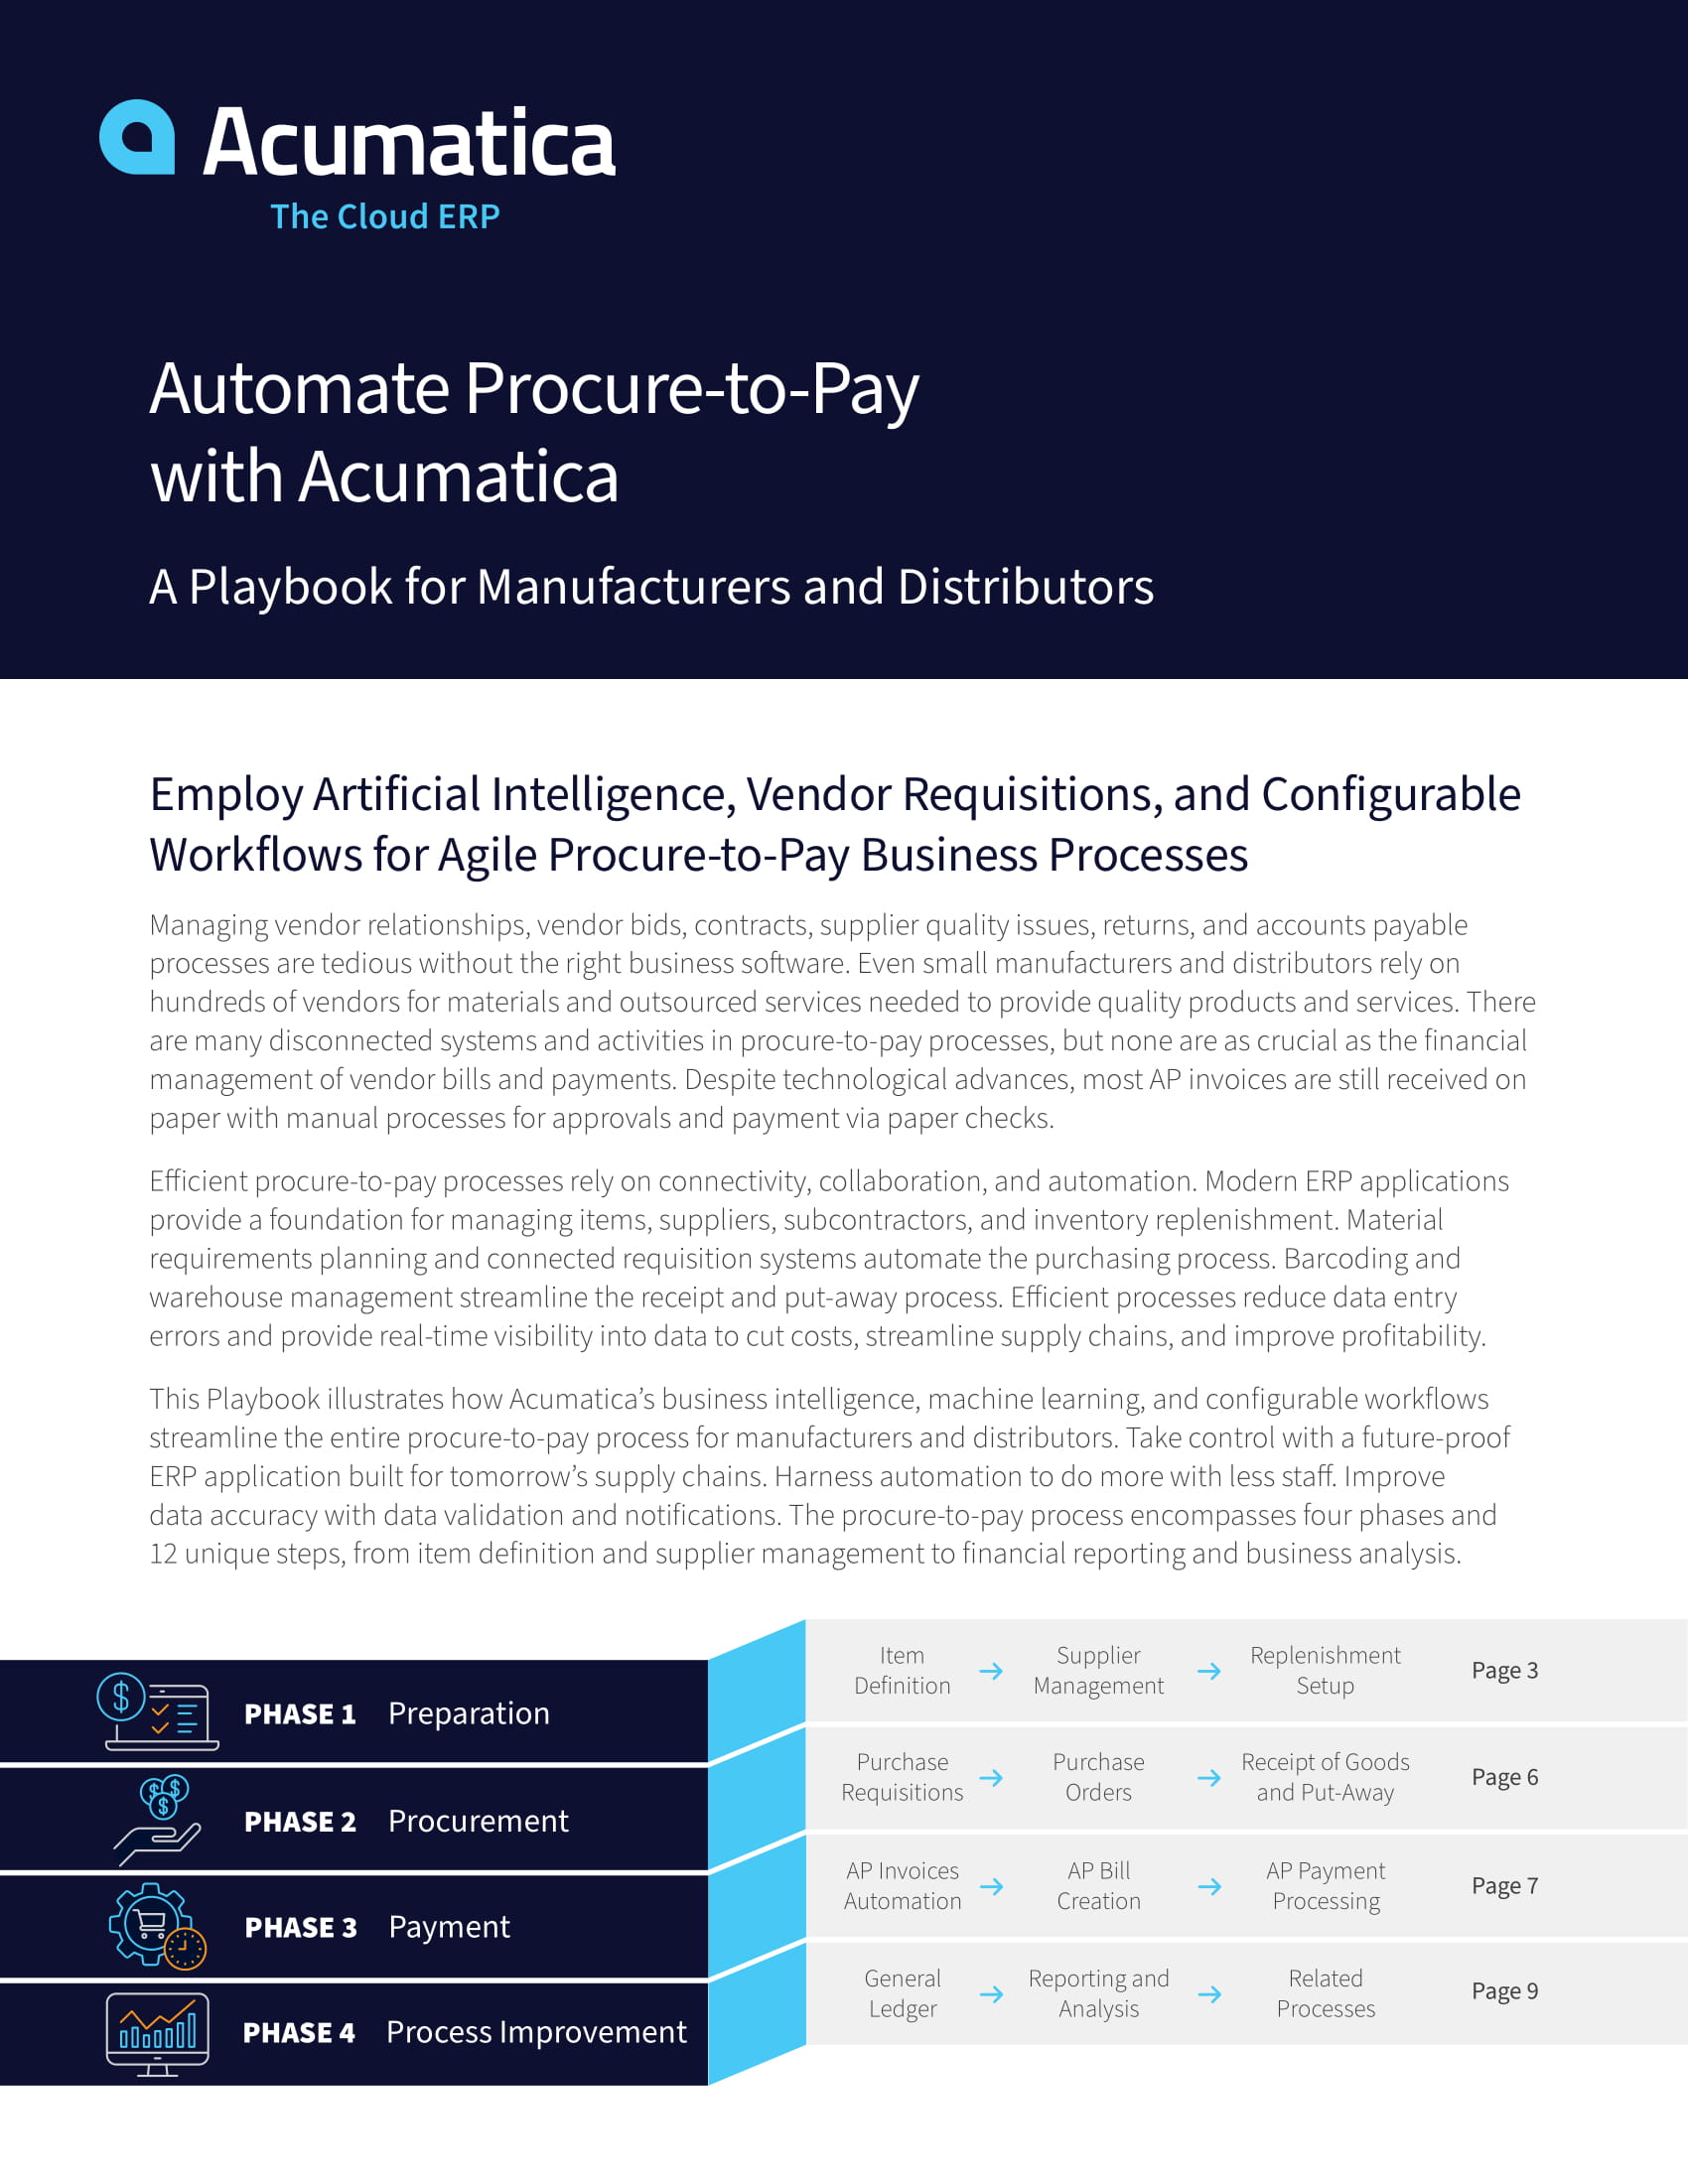 Using Cloud ERP for Procure-to-Pay Automation